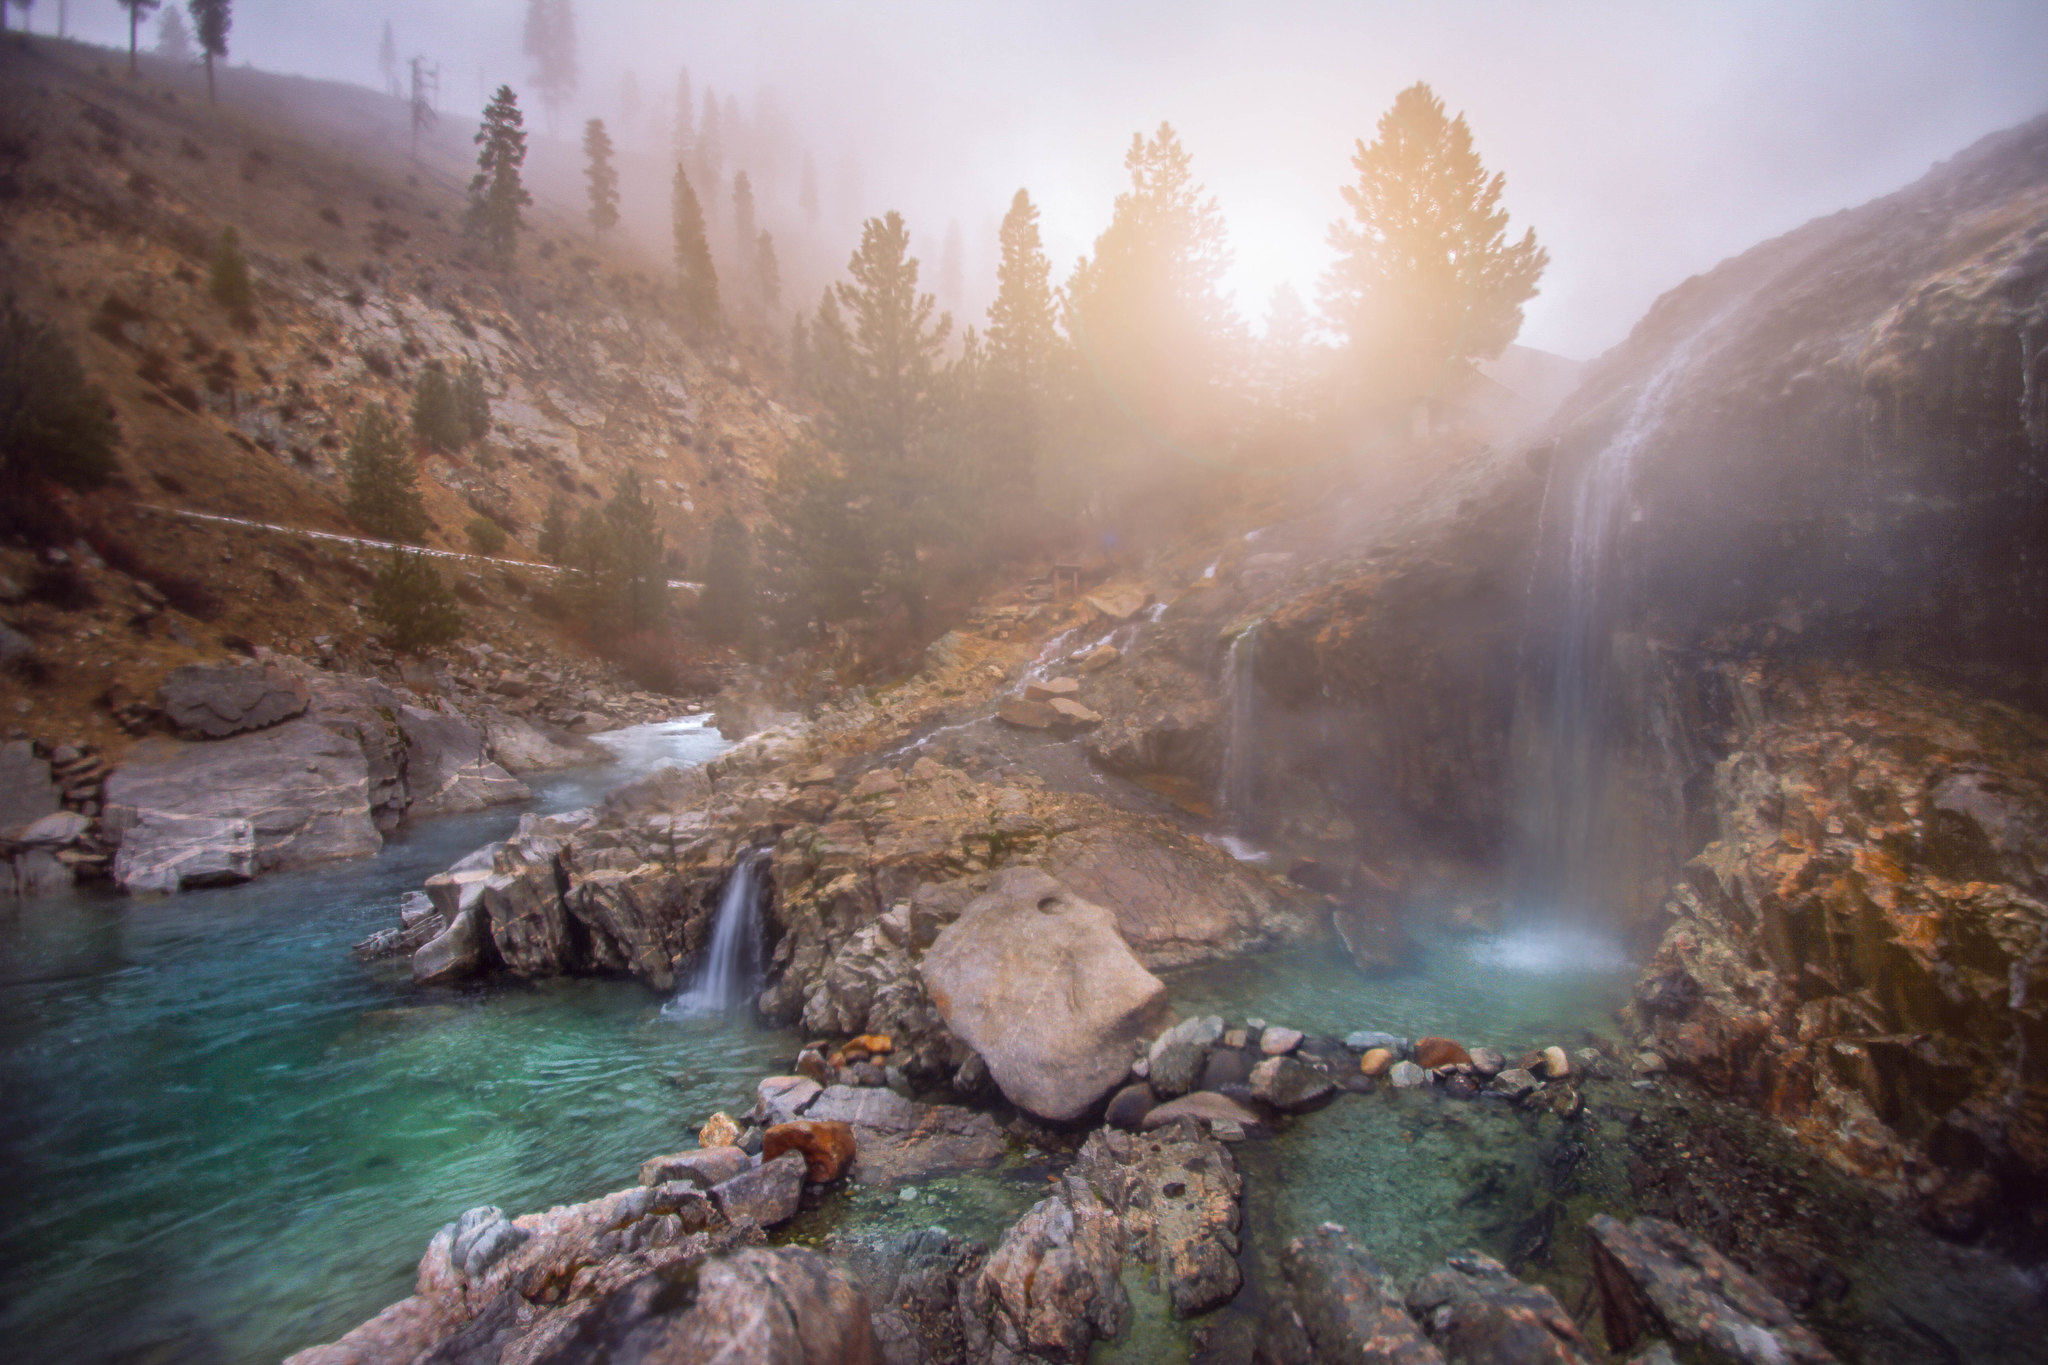 Steamy Kirkham Hot Springs pictured on a bright foggy day as a piece on the best things to see in Idaho